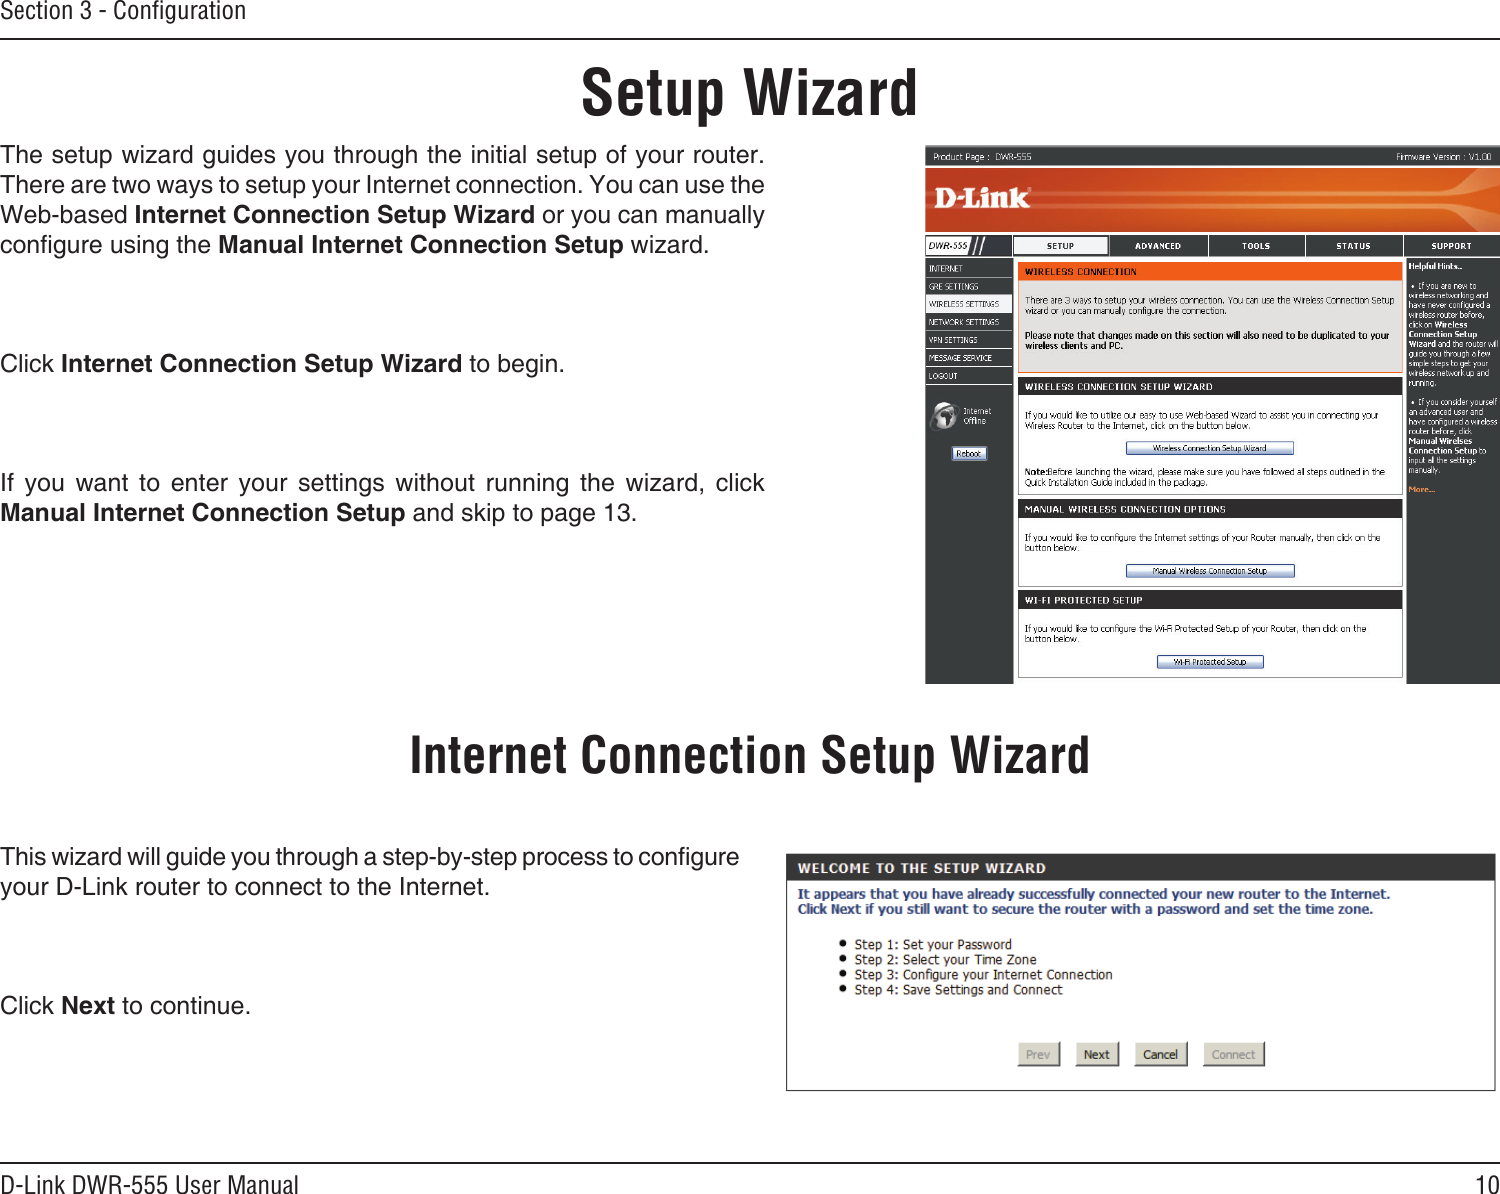 10D-Link DWR-555 User ManualSection 3 - ConﬁgurationSetup WizardThe setup wizard guides you through the initial setup of your router. There are two ways to setup your Internet connection. You can use the Web-based Internet Connection Setup Wizard or you can manually congure using the Manual Internet Connection Setup wizard.Click Internet Connection Setup Wizard to begin.If  you  want  to  enter  your  settings  without  running  the  wizard,  click Manual Internet Connection Setup and skip to page 13.This wizard will guide you through a step-by-step process to congure your D-Link router to connect to the Internet.Click Next to continue.Internet Connection Setup Wizard